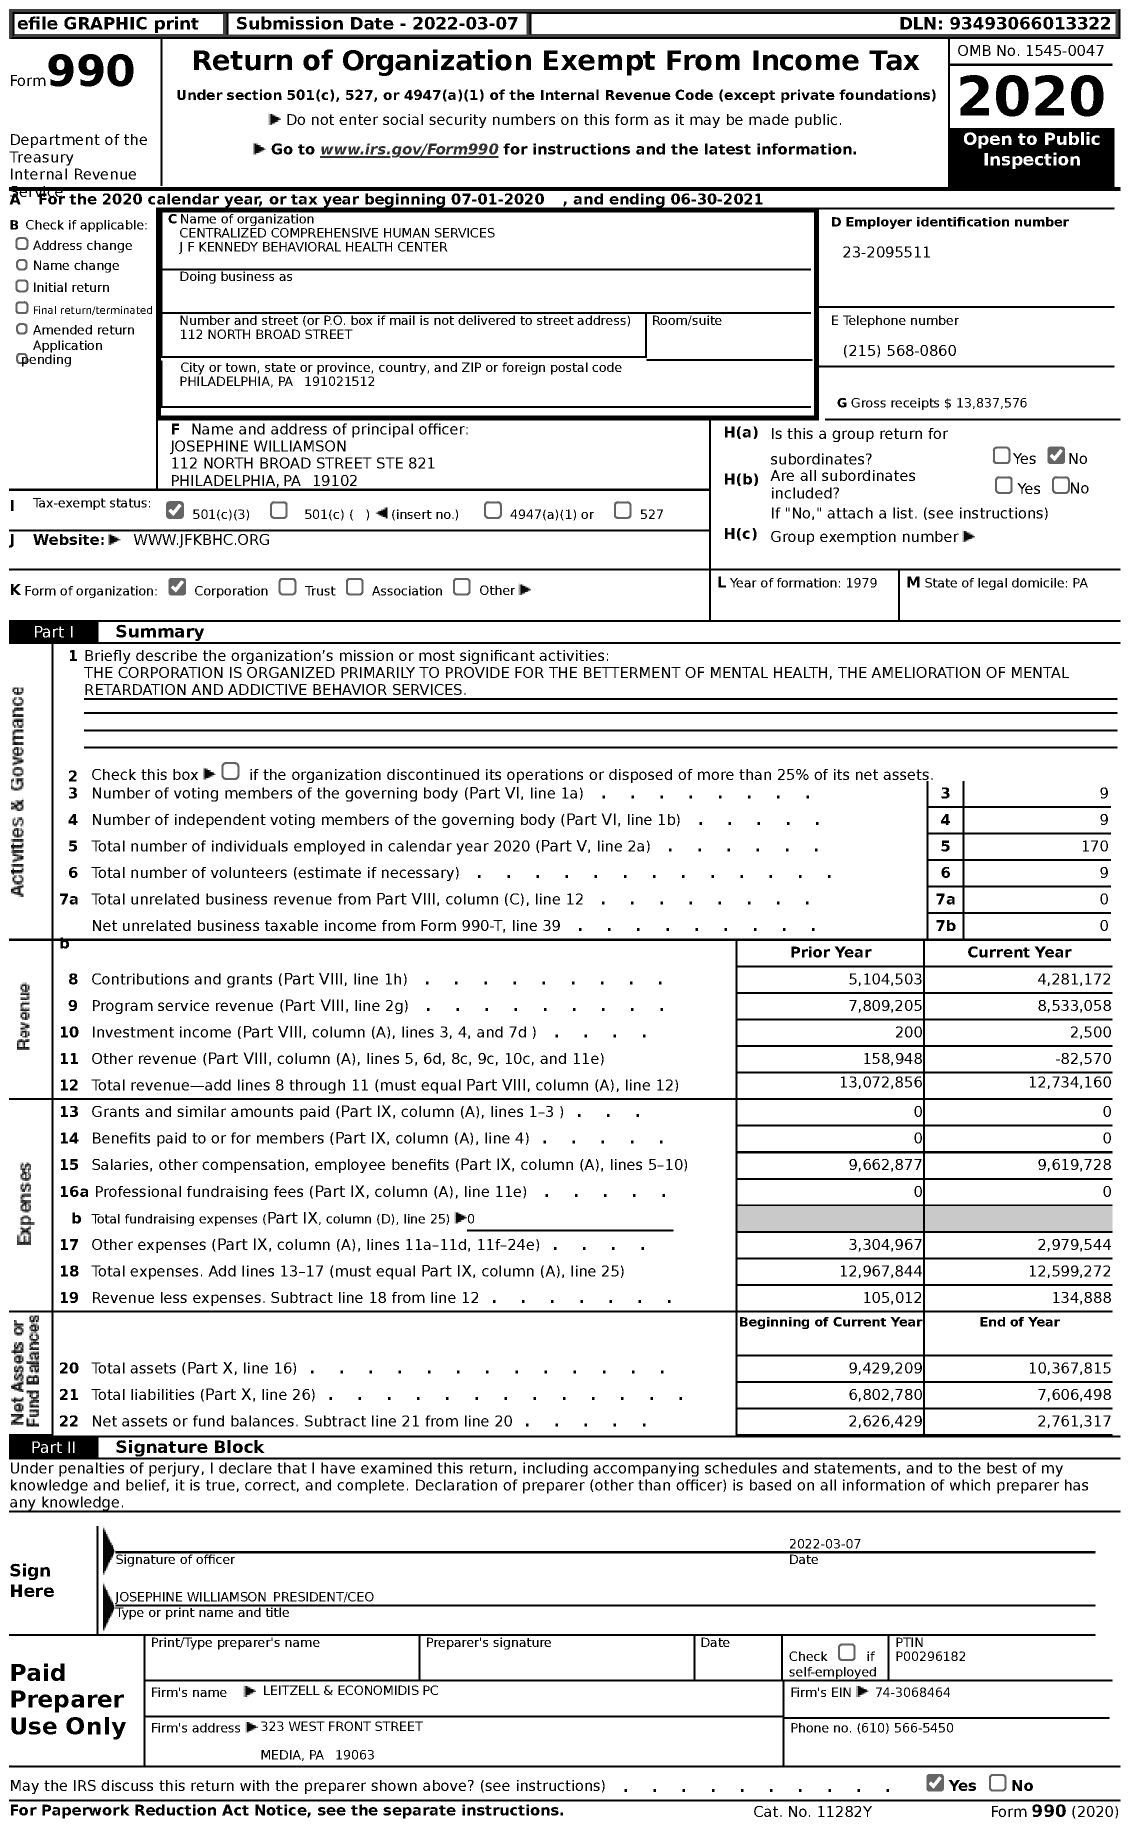 Image of first page of 2020 Form 990 for John F Kennedy Behavioral Health Center